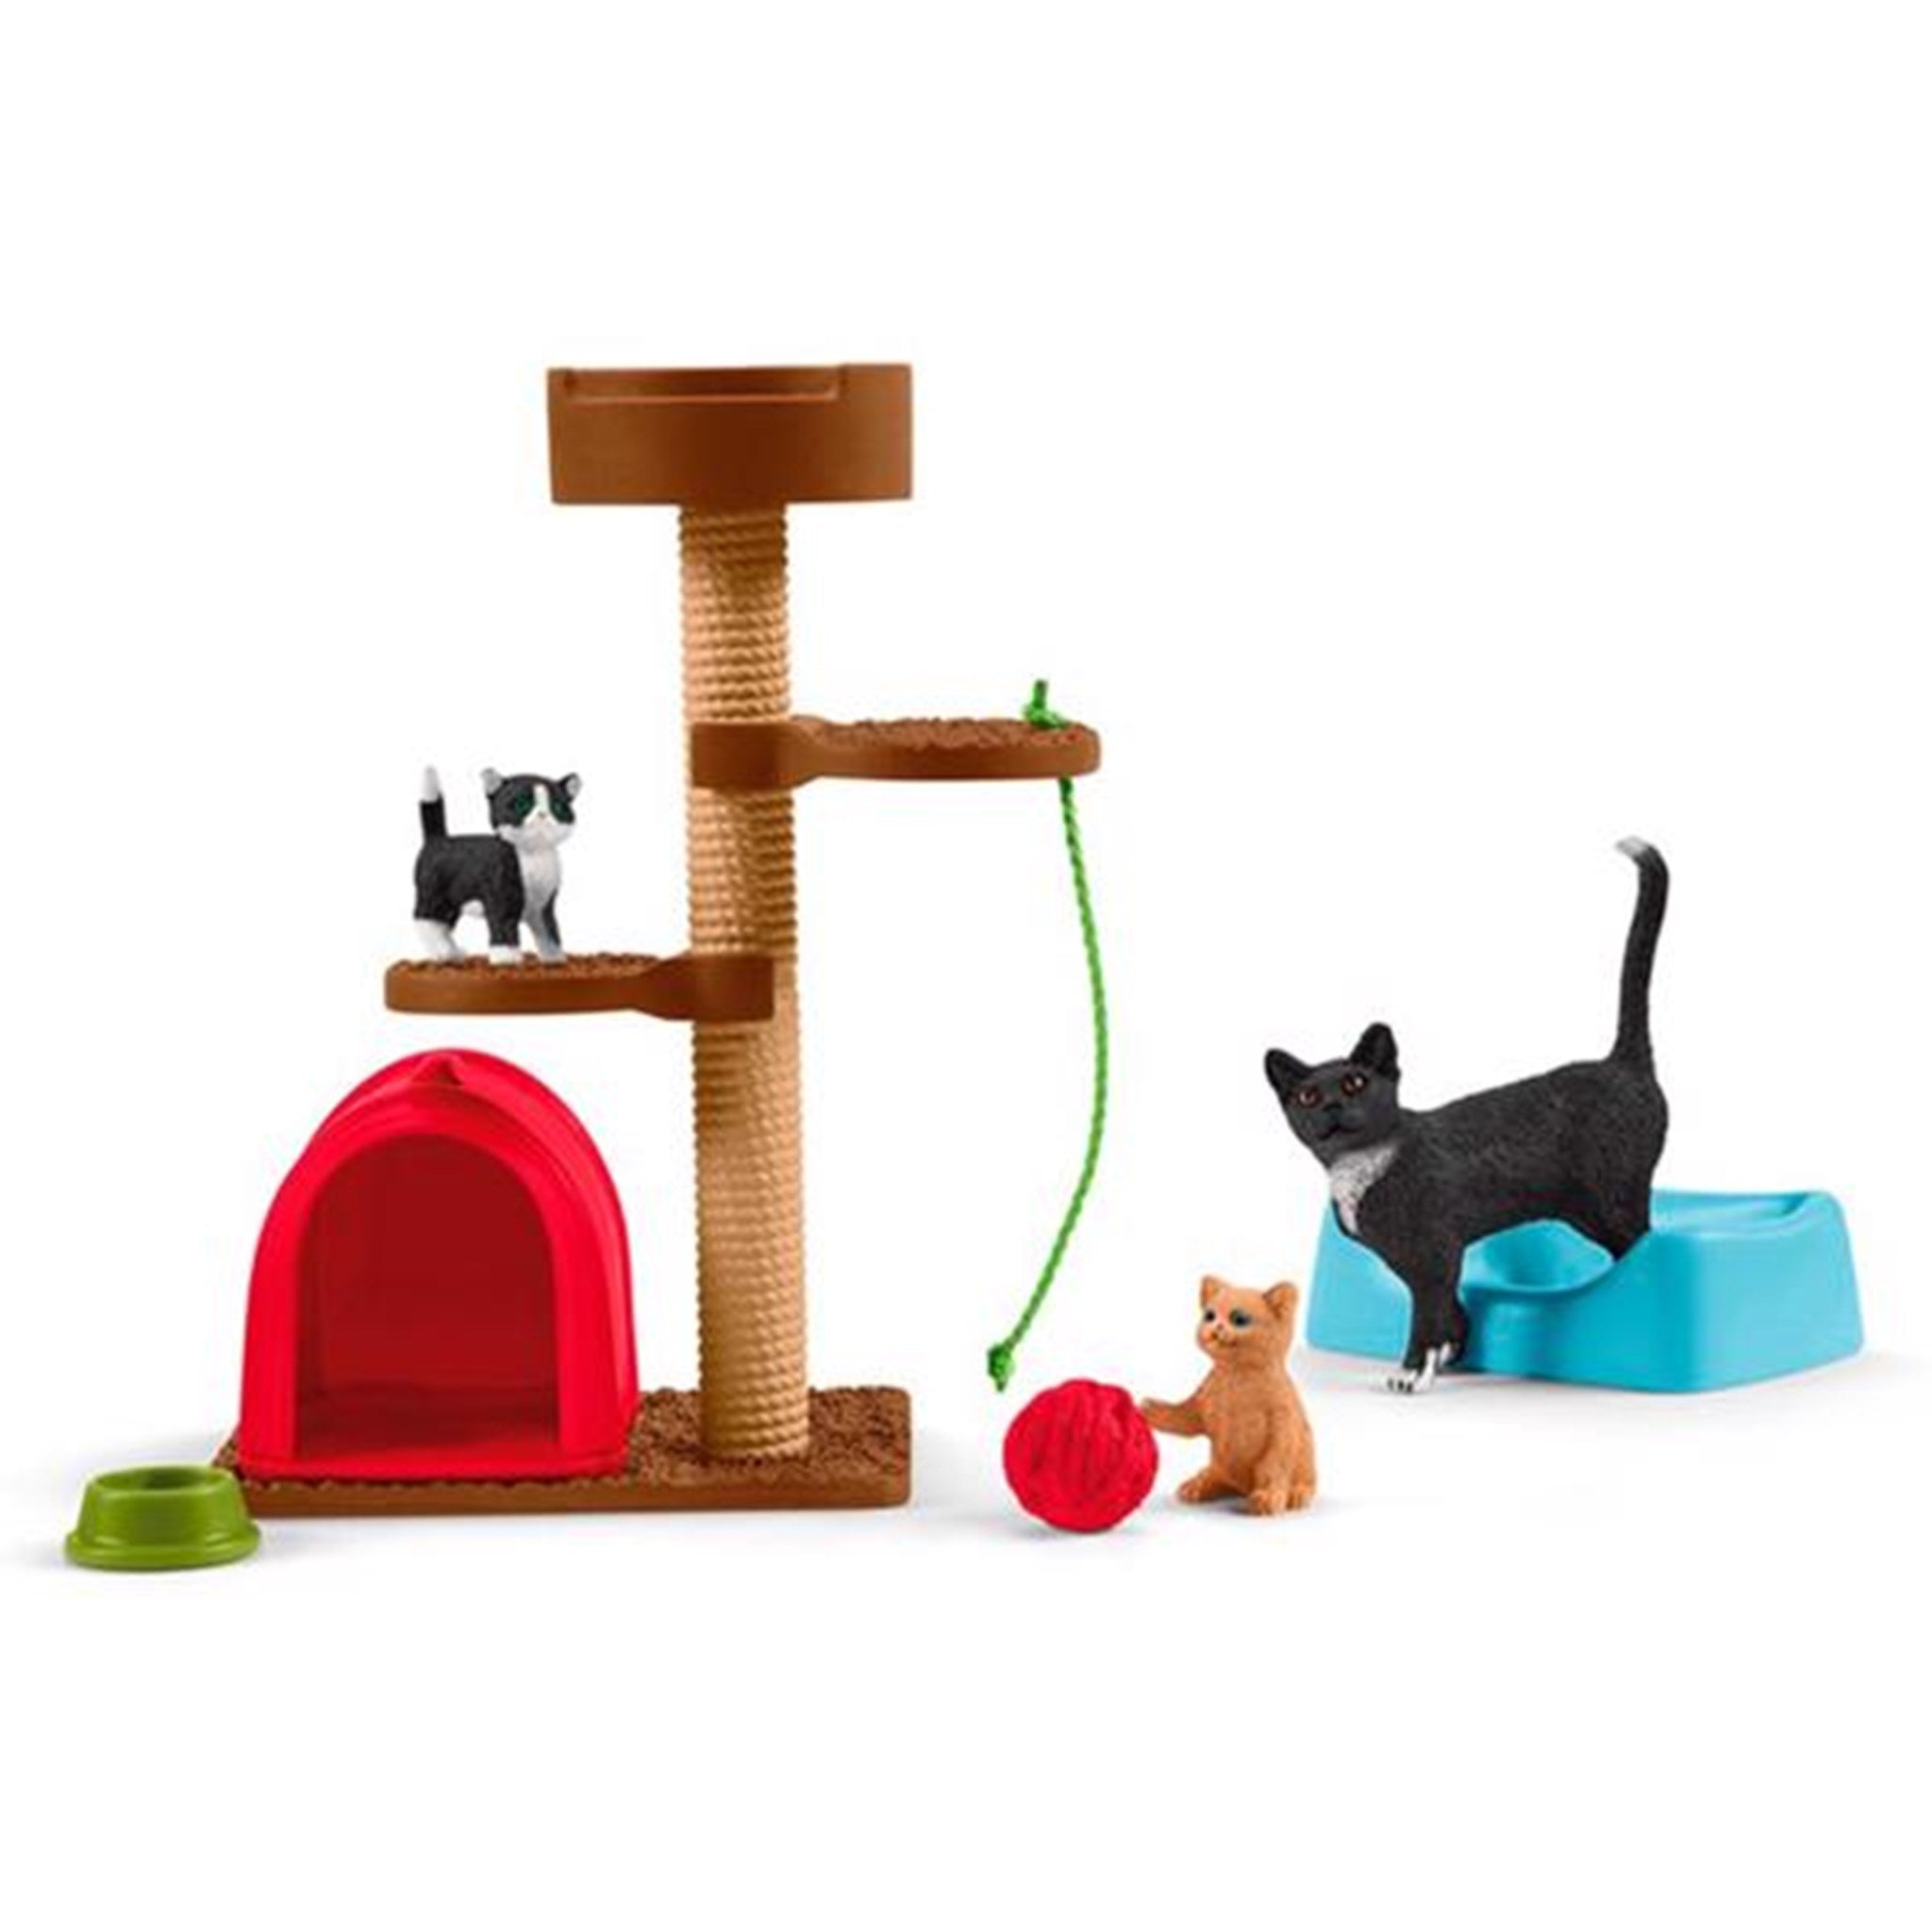 Schleich Farm World Playtime for Cute Cats